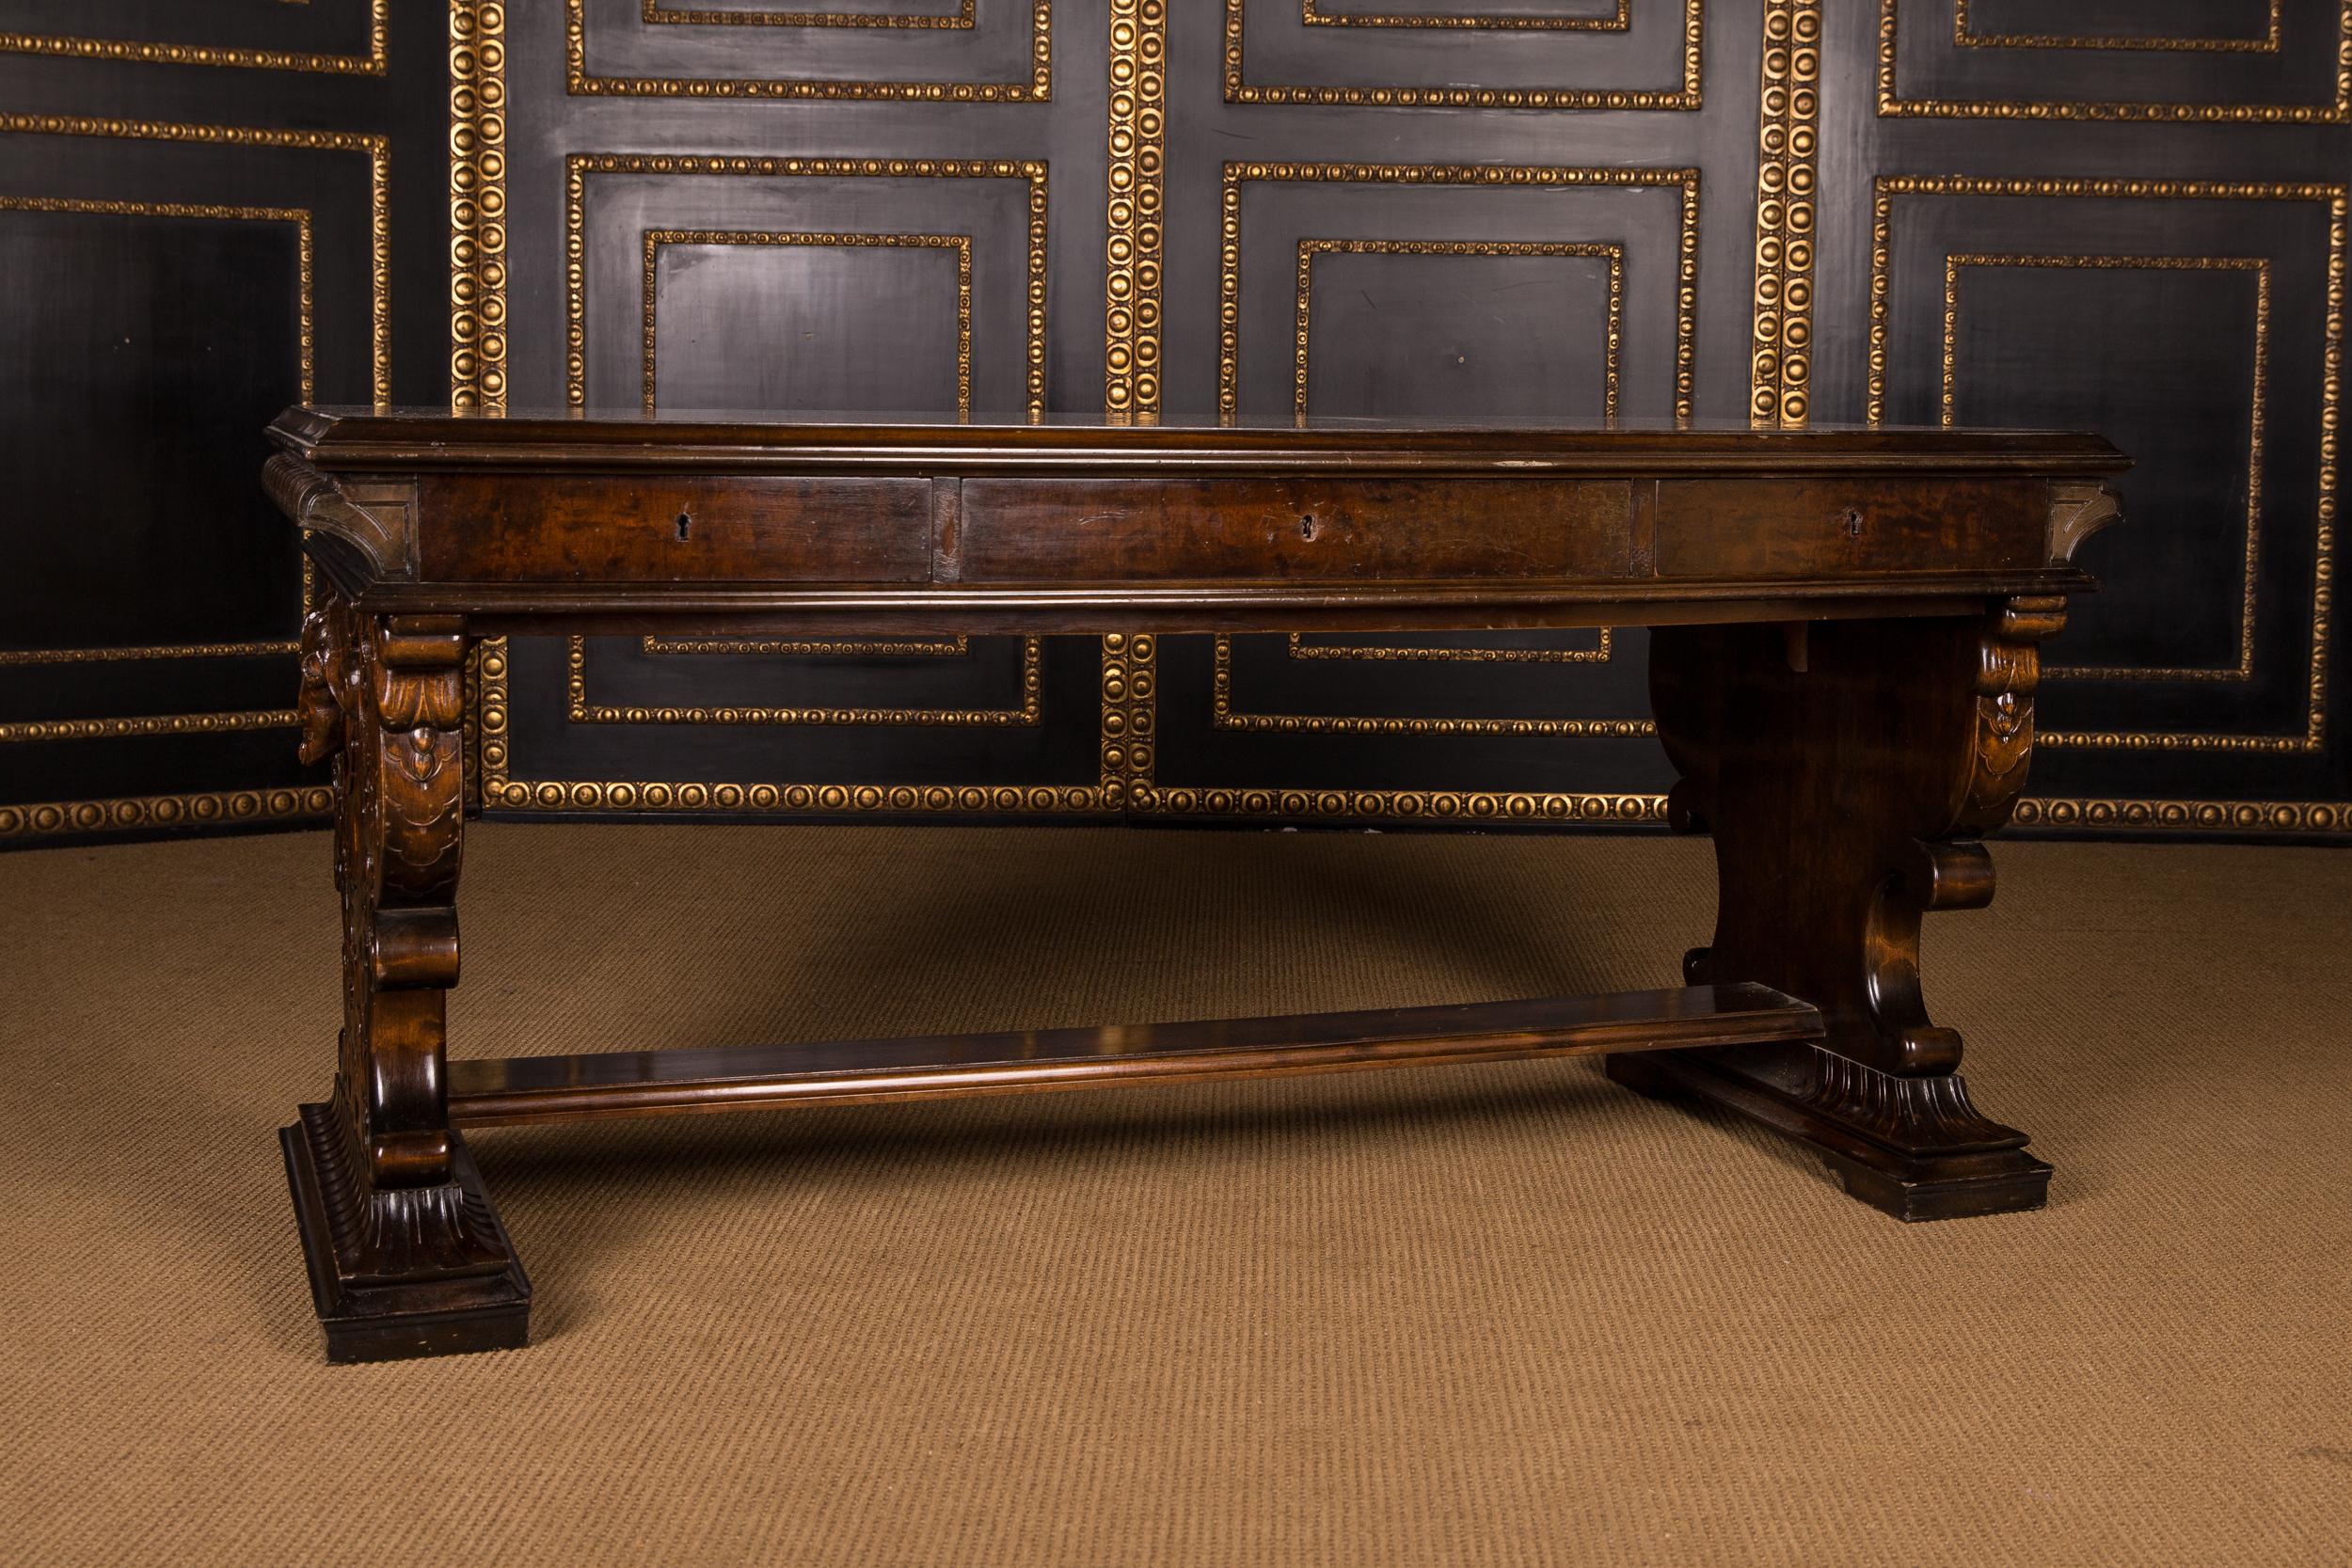 Oakwood. Straight body ending on curly, volute-shaped legs. Richly carved on all sides. Slightly protruding tabletop, including the middle drawer. 

